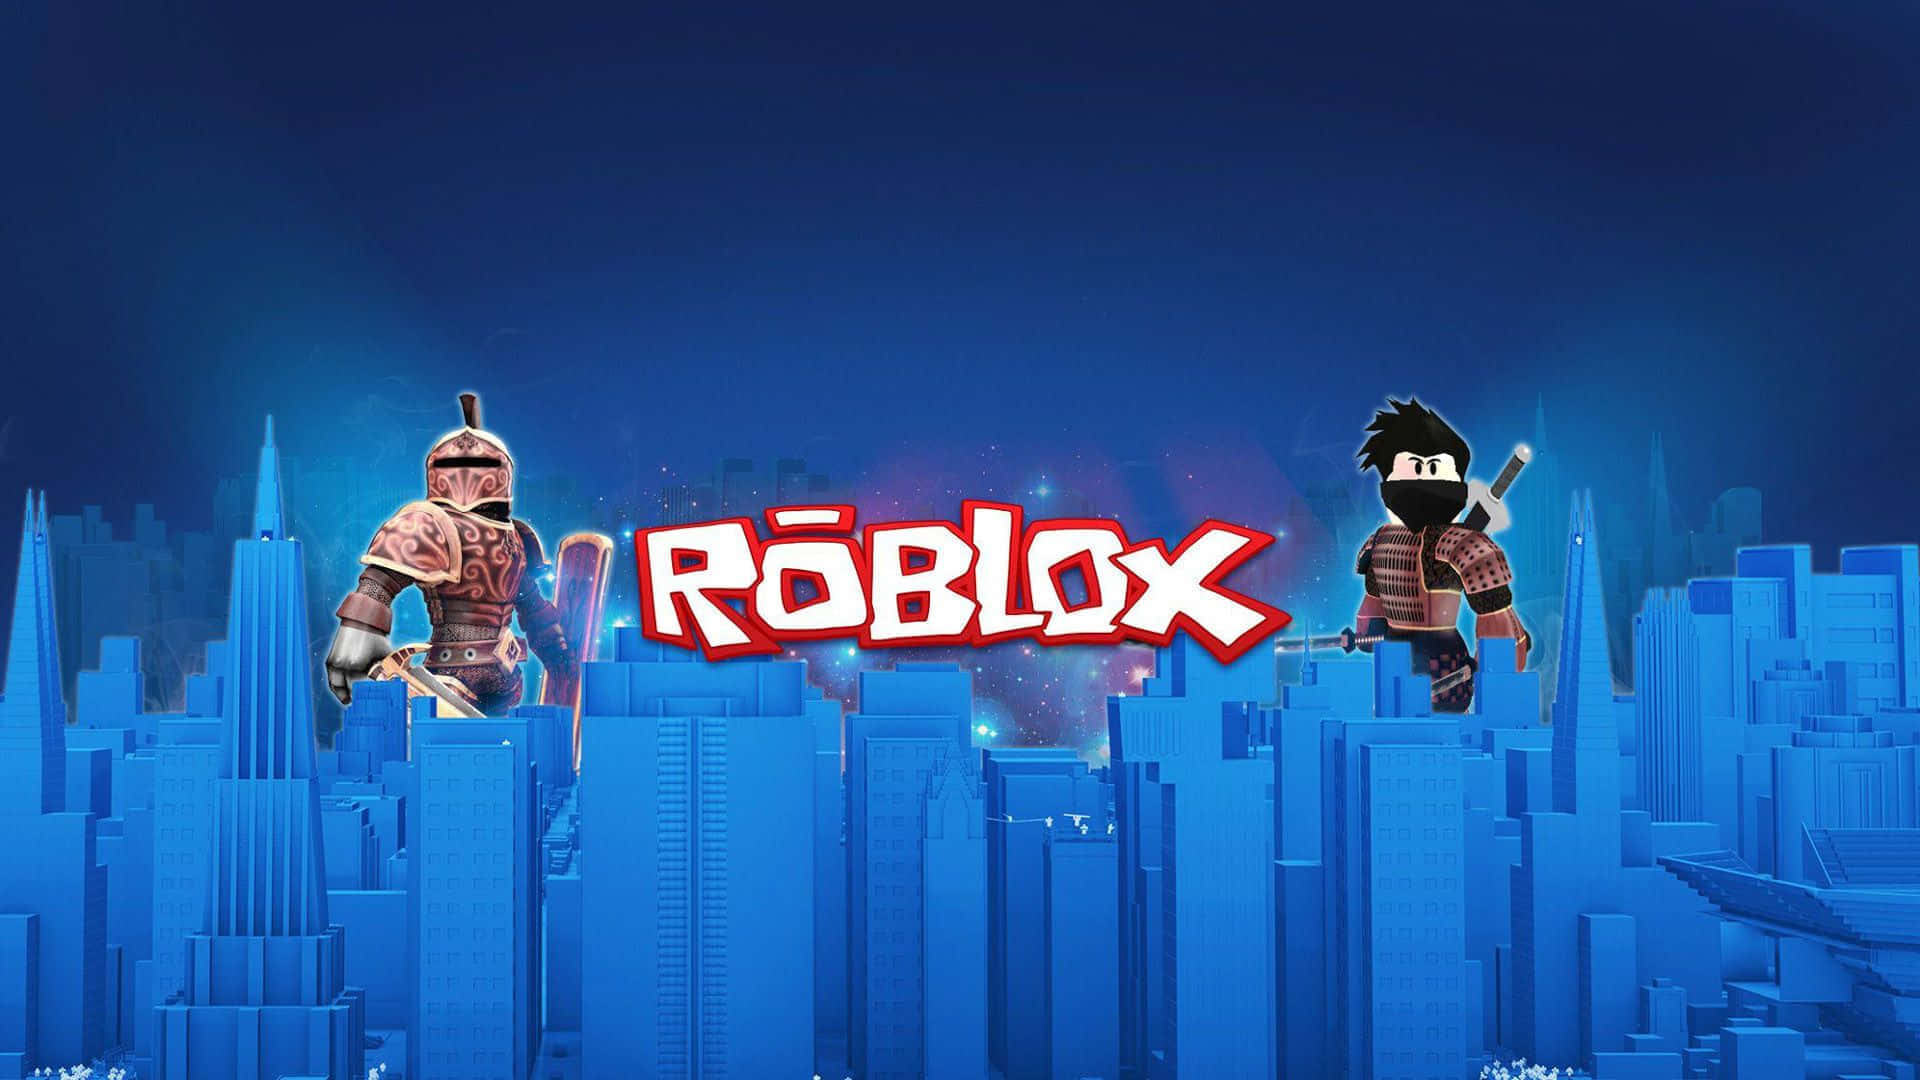 Look at this impressive Roblox Avater ready for your next great journey